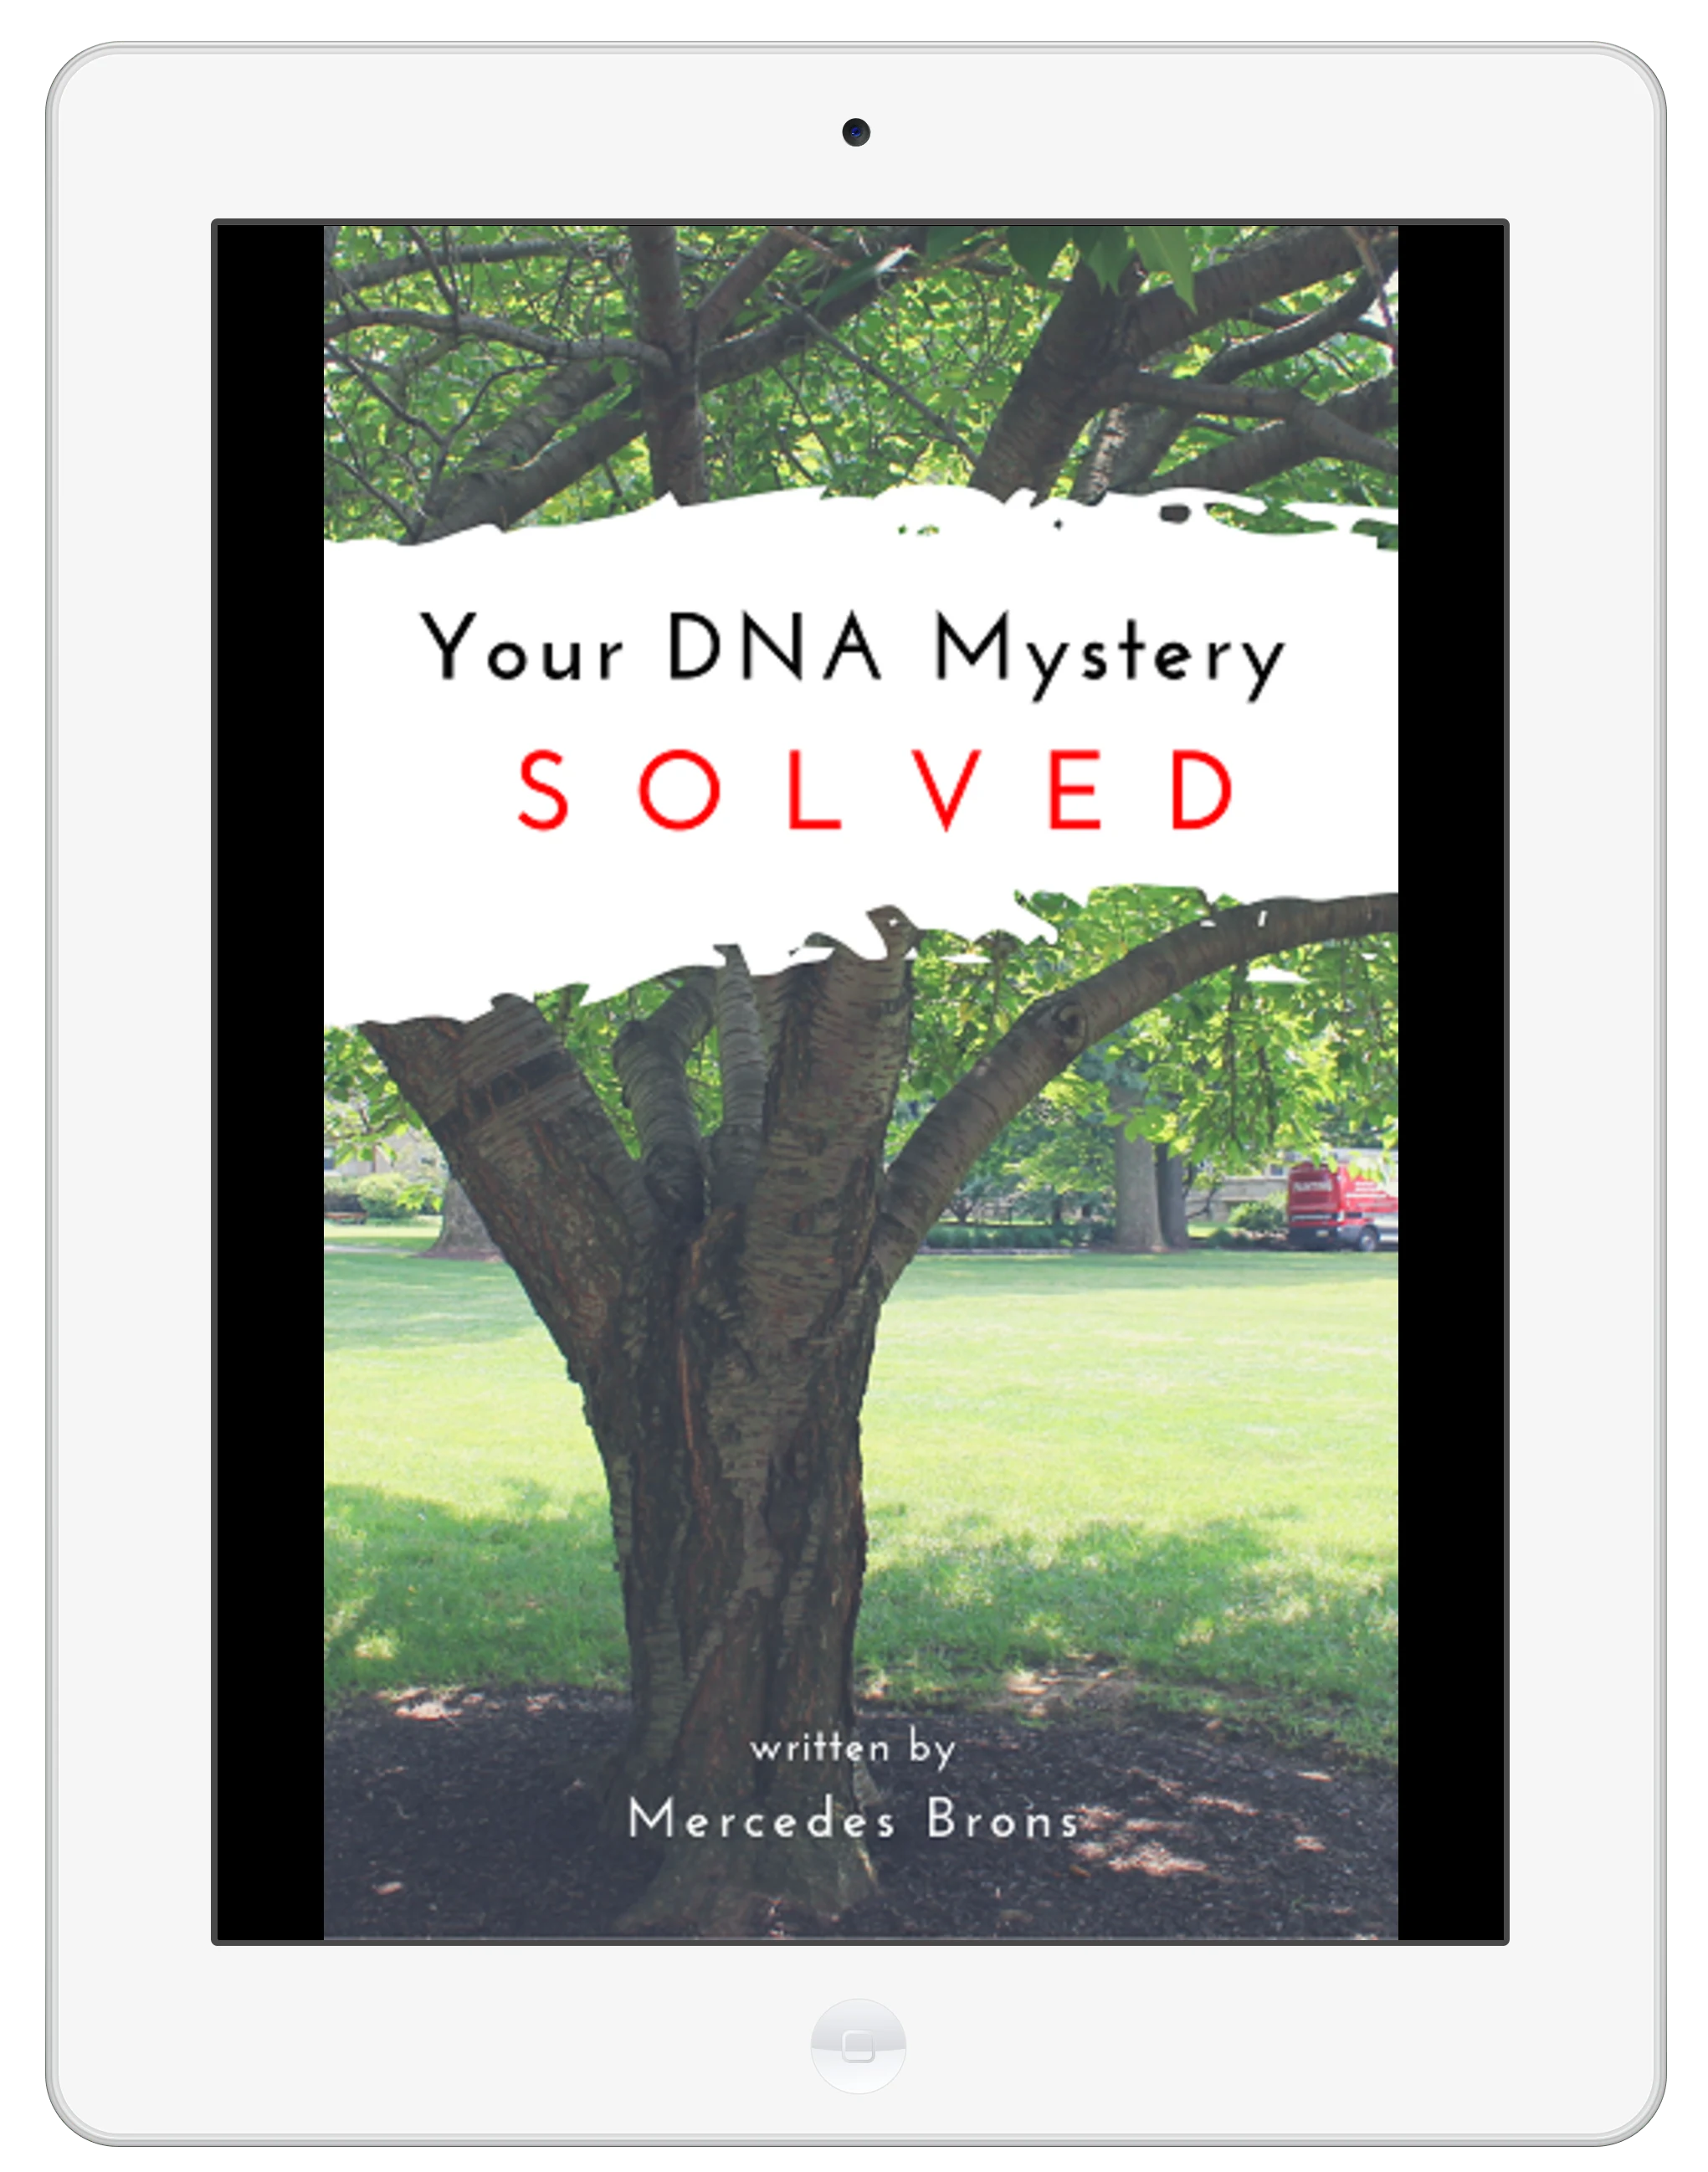 How to solve your DNA mystery ebook